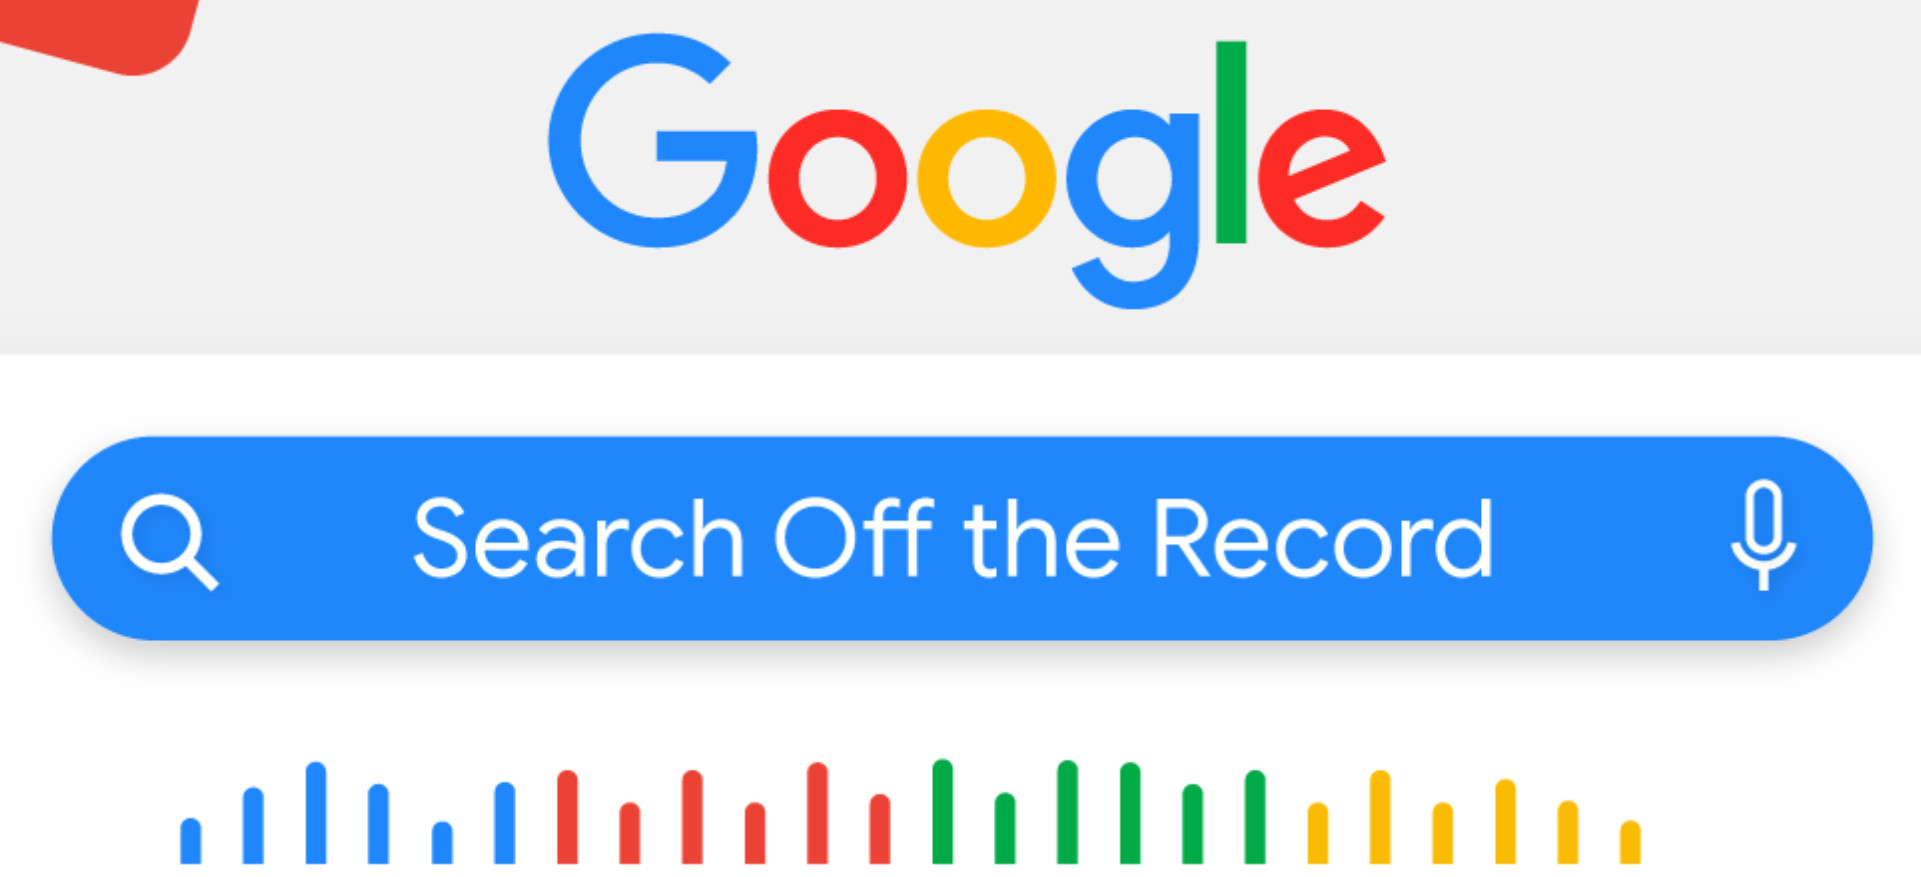 Google Search Off the Record